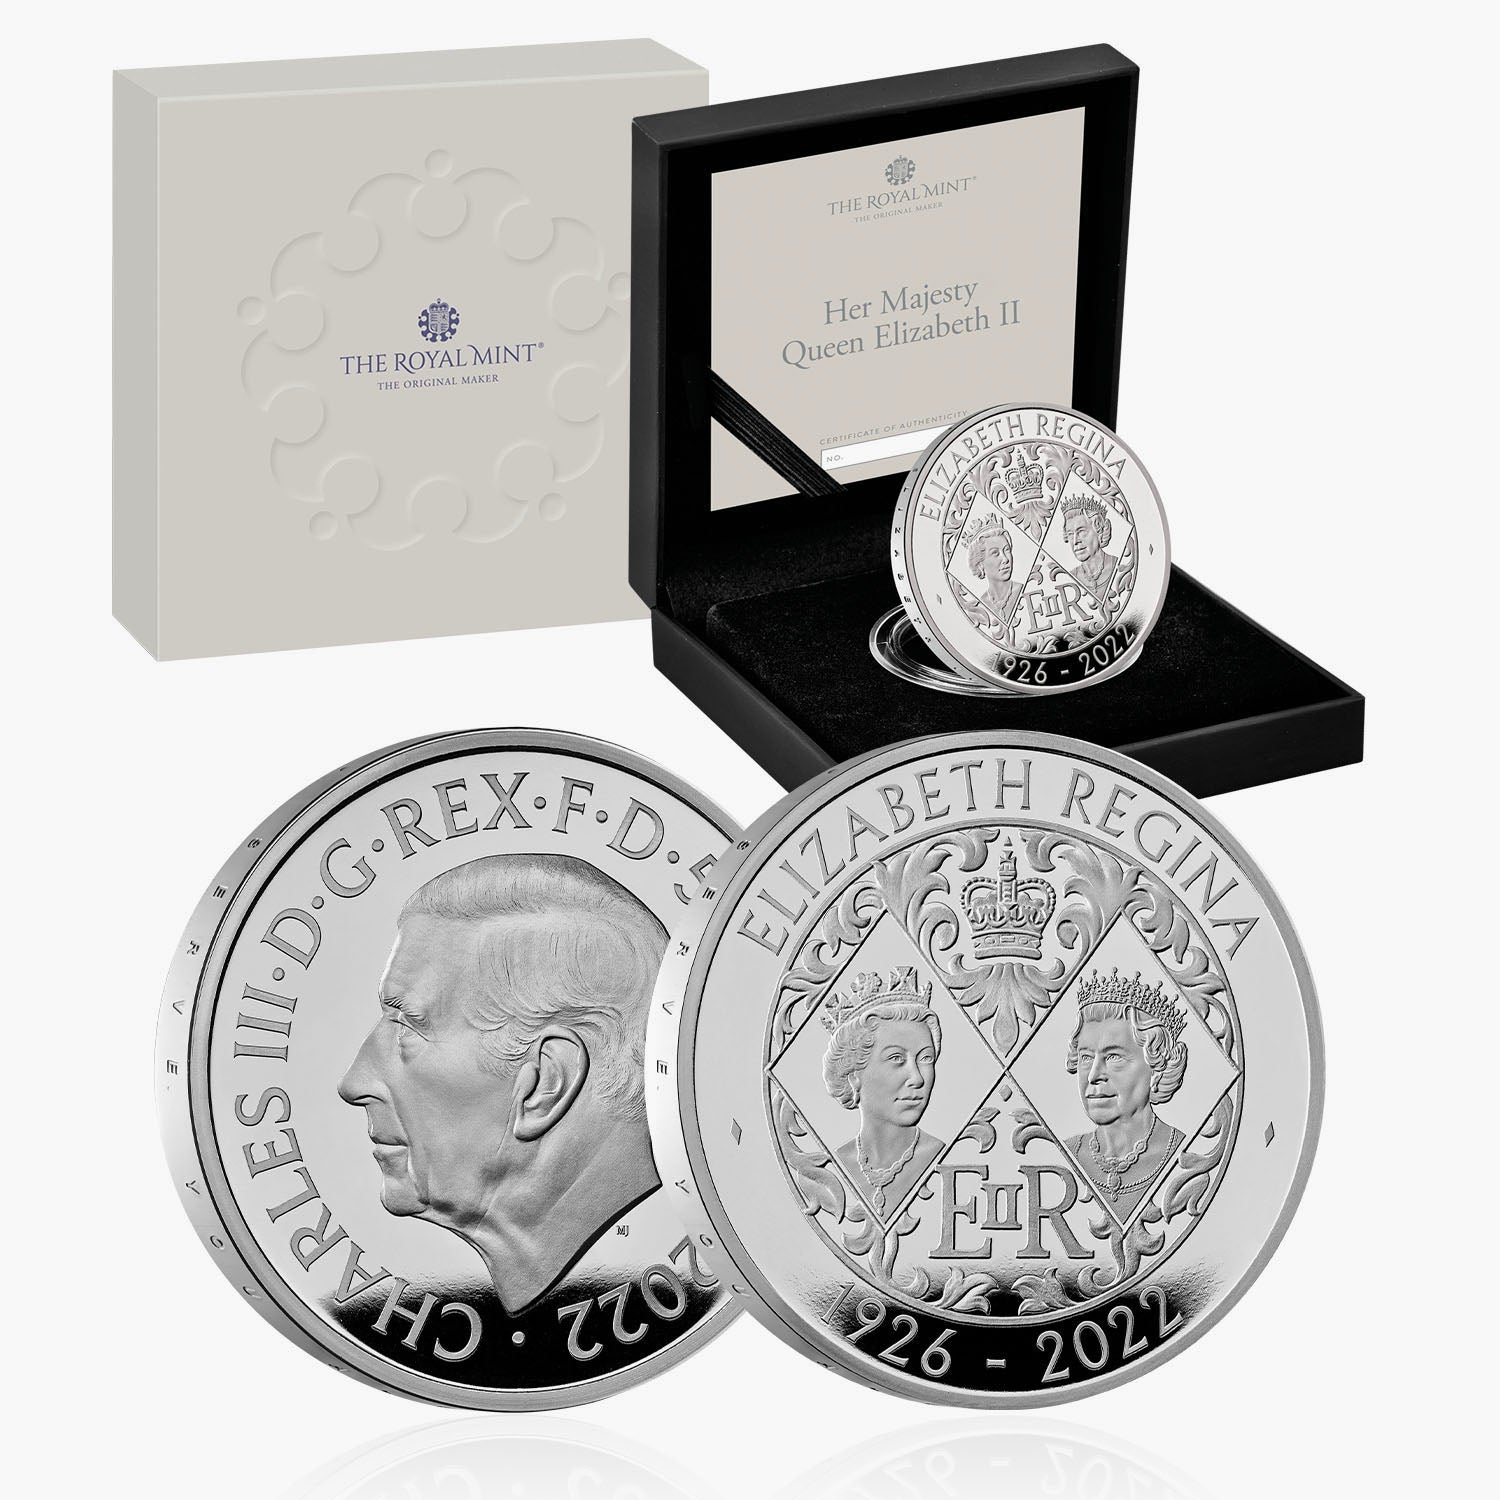 Her Majesty Queen Elizabeth II 2022 £5 Silver Proof Coin - King Charles III first portrait